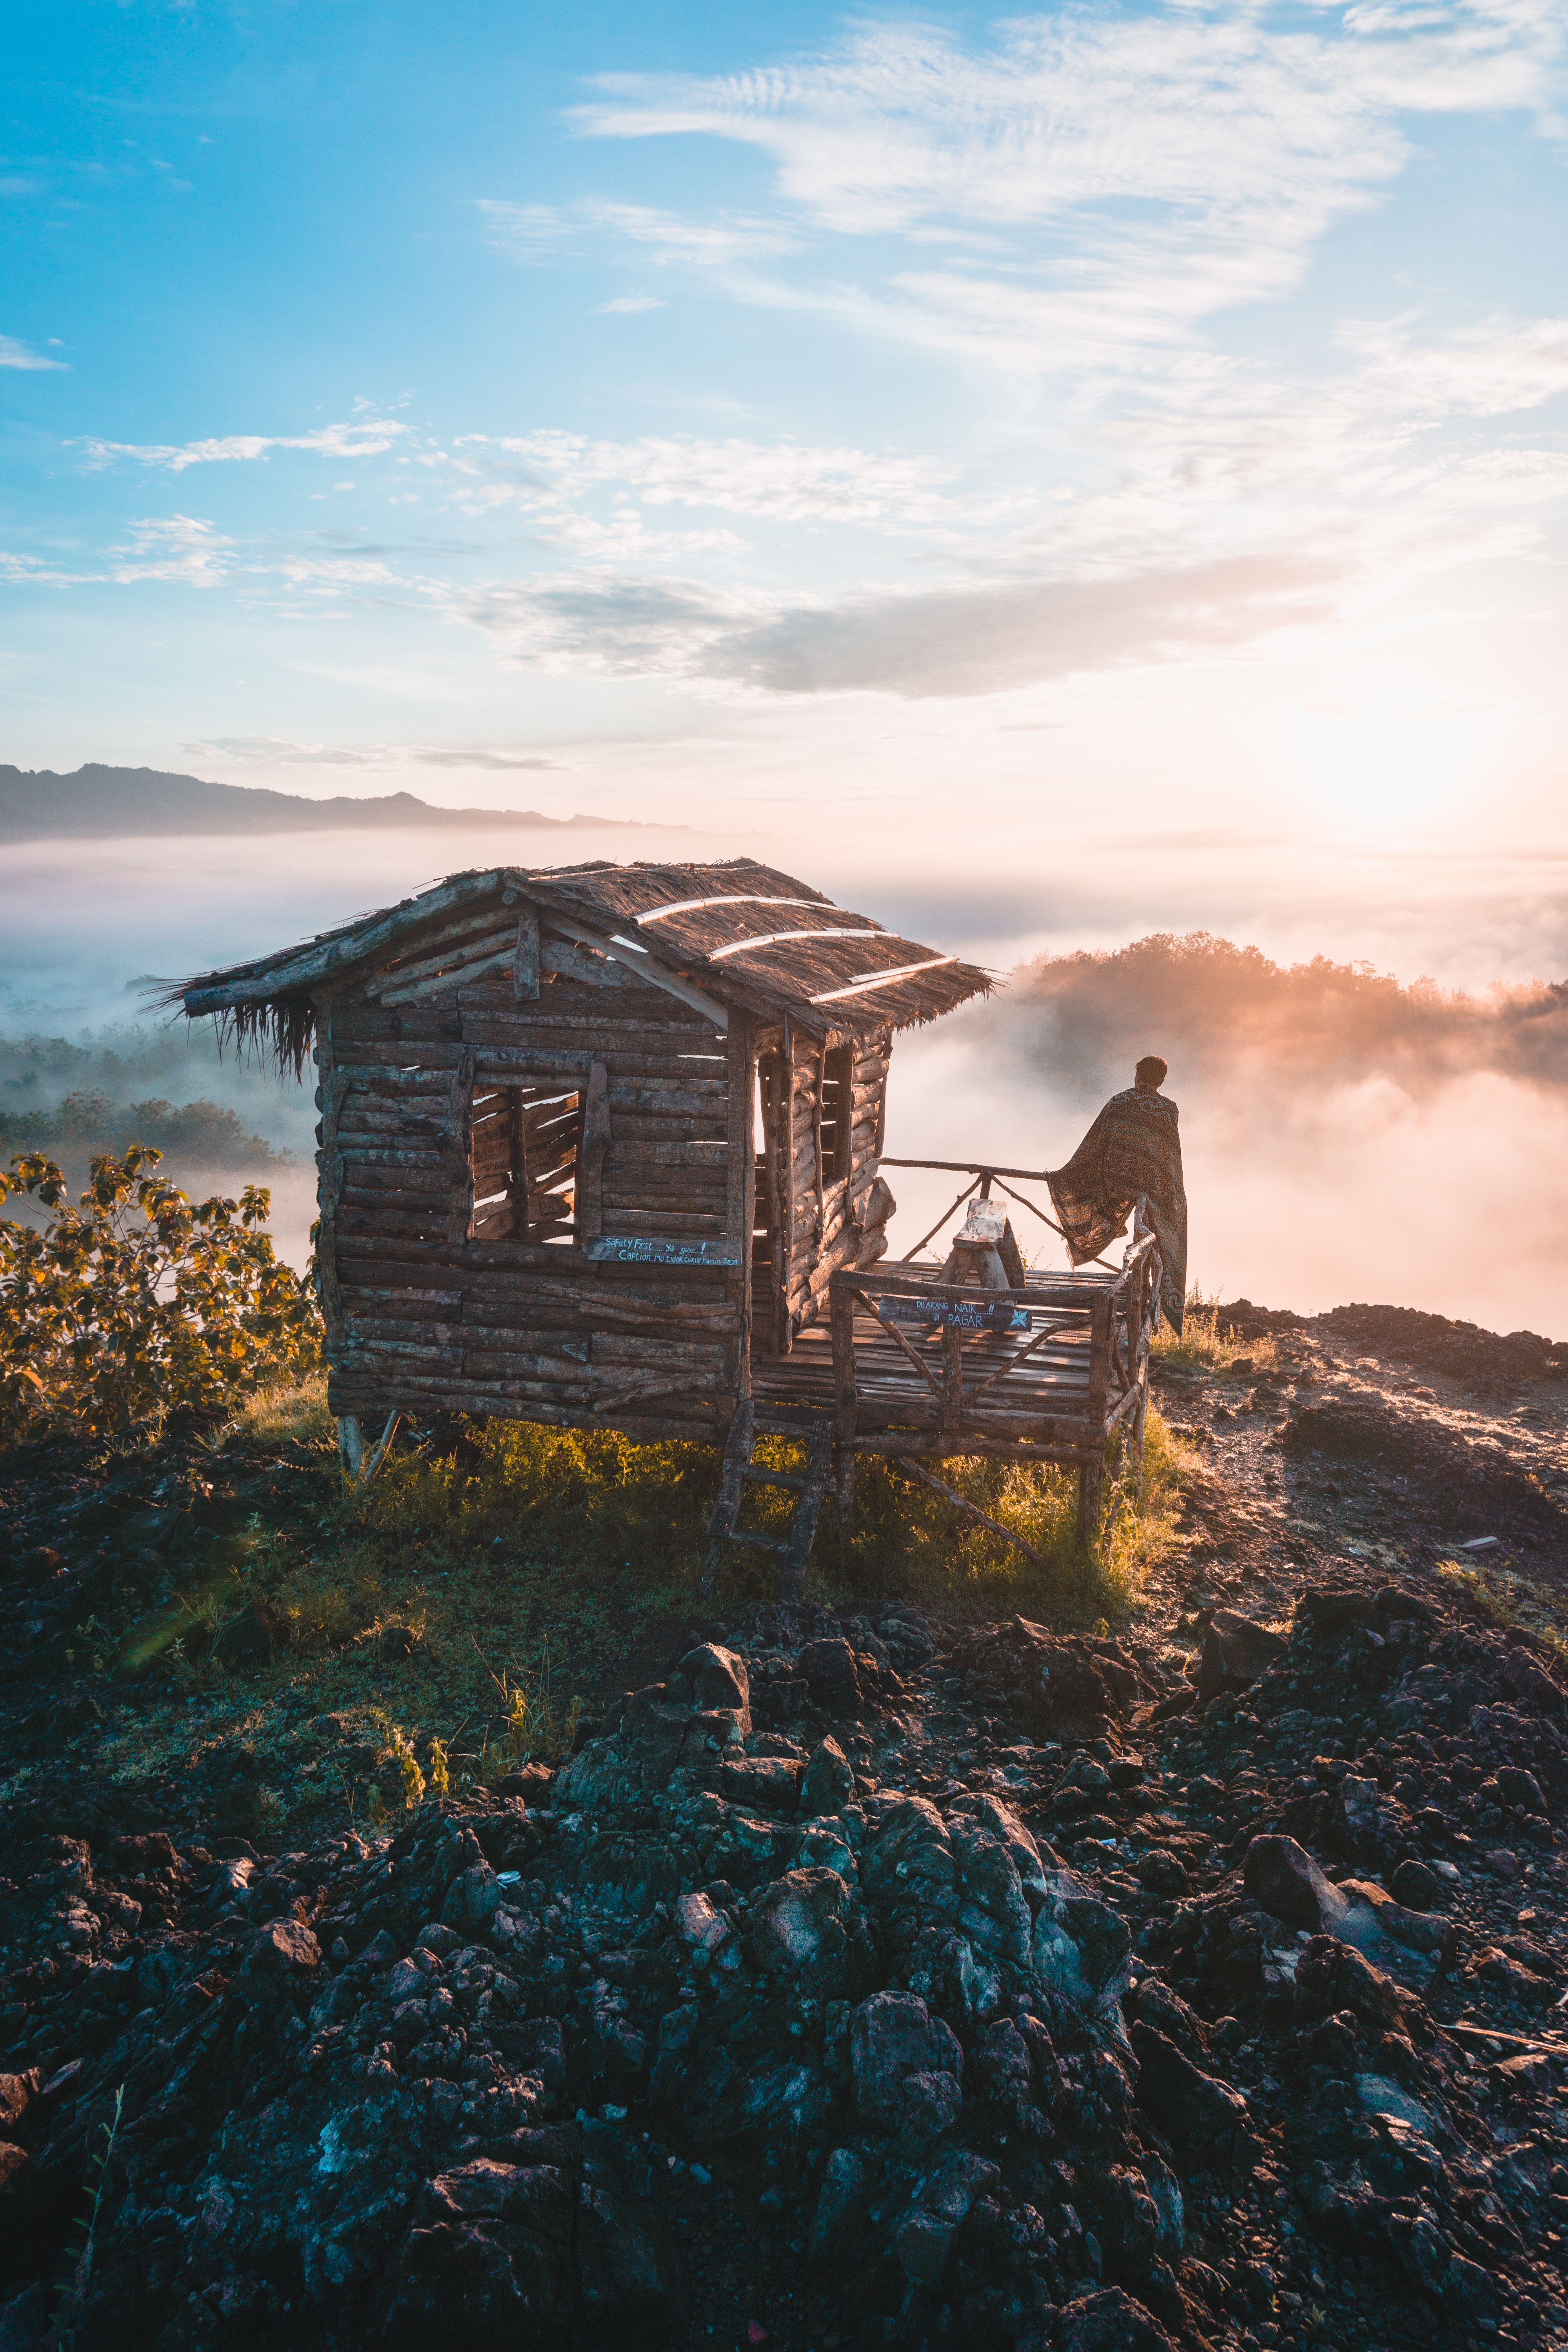 indonesia, small house, privacy, lodge, loneliness, nature, mountains, seclusion UHD